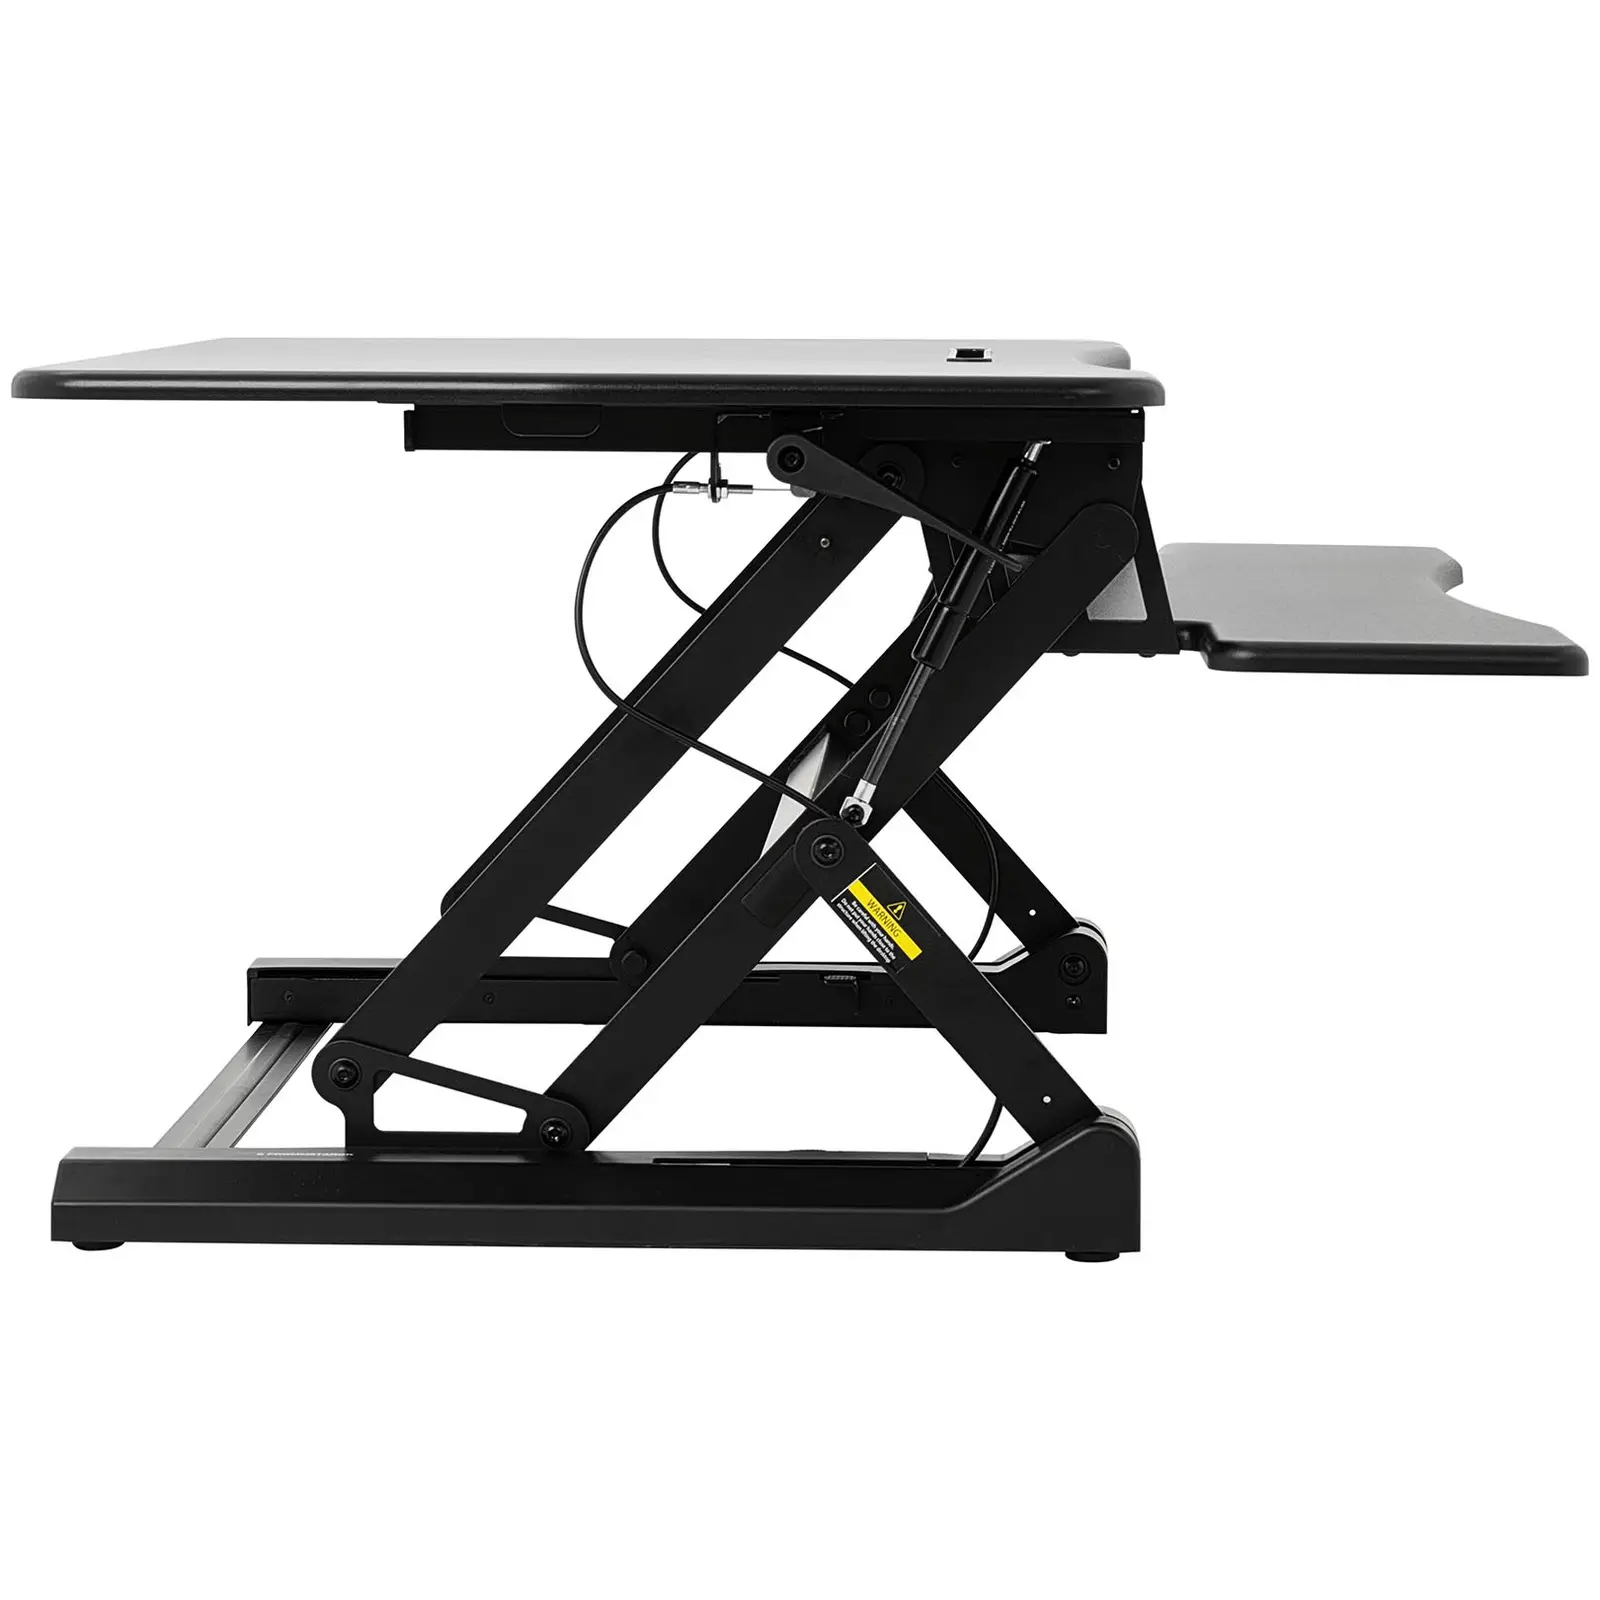 Sit-Stand Desk - continuously height-adjustable - 16.5 to 41.5 cm